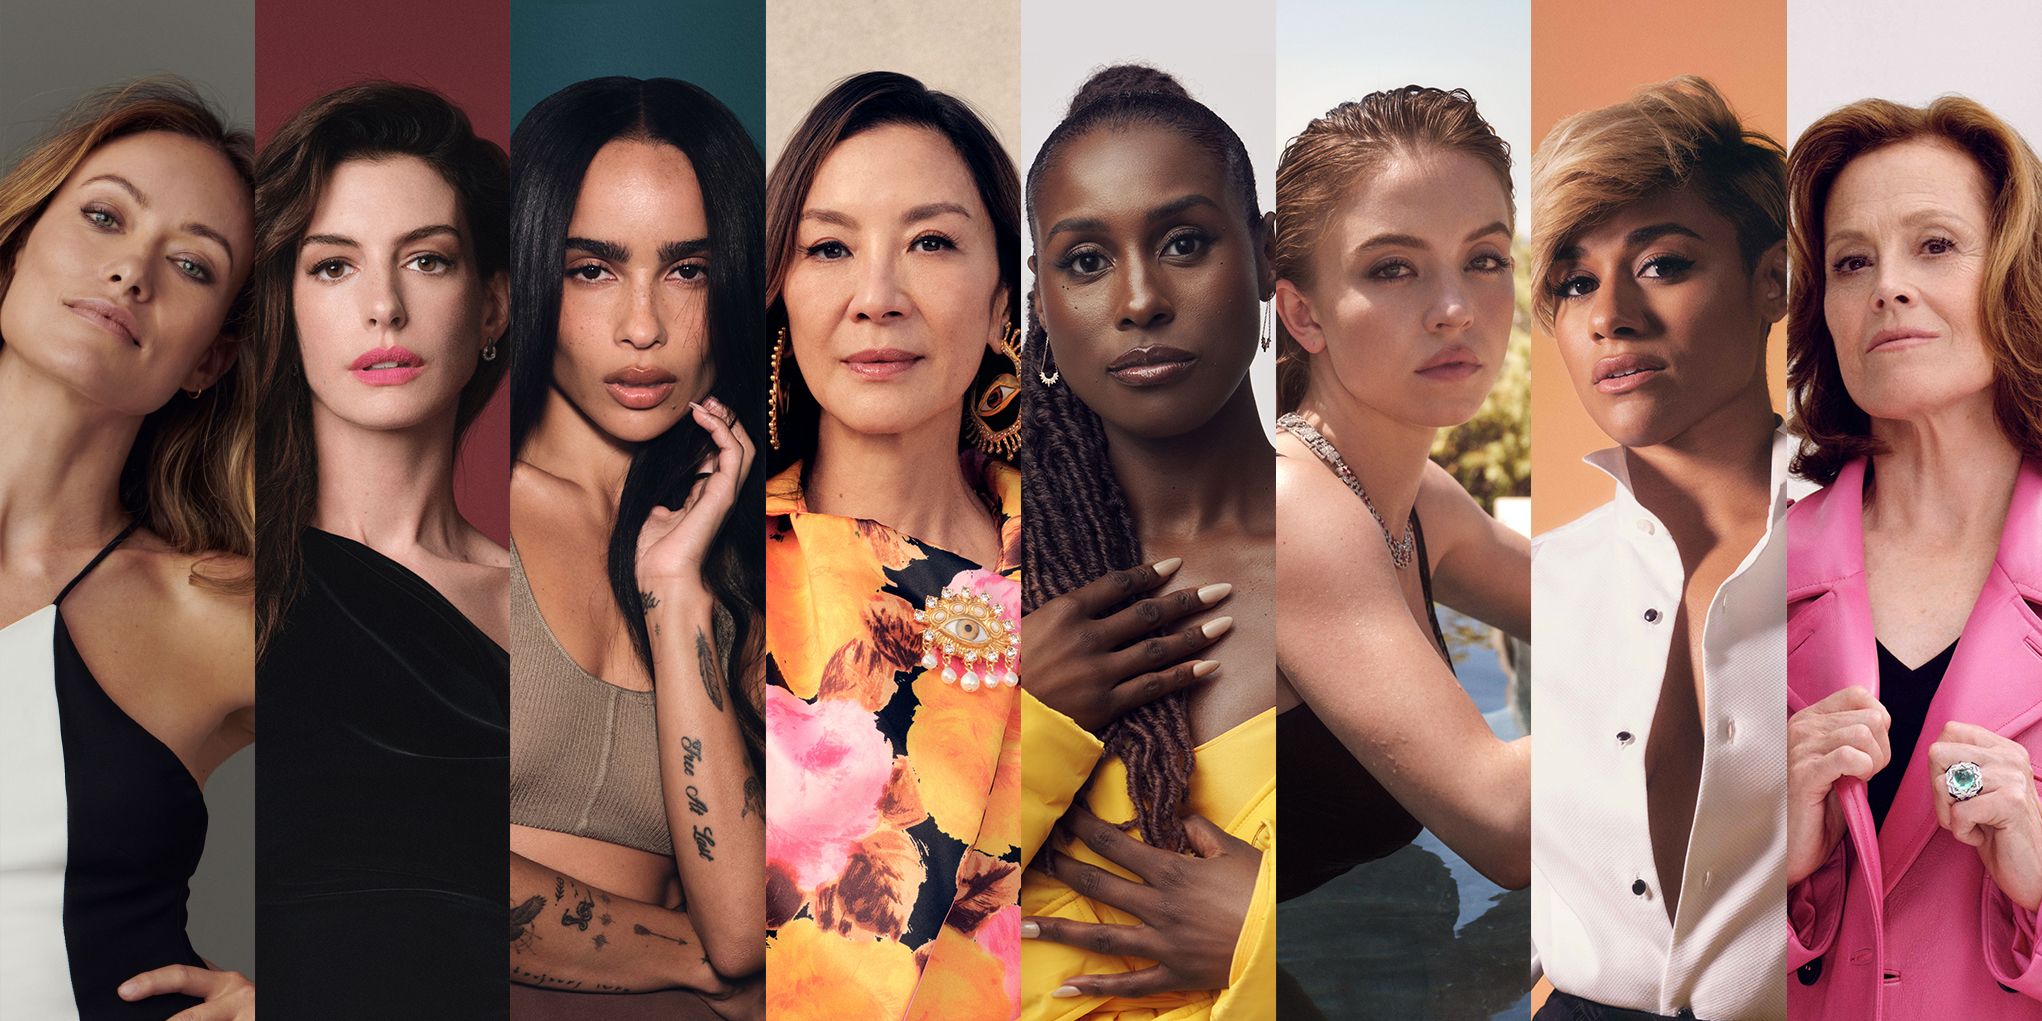 Introducing ELLE's 2022 Women in Hollywood